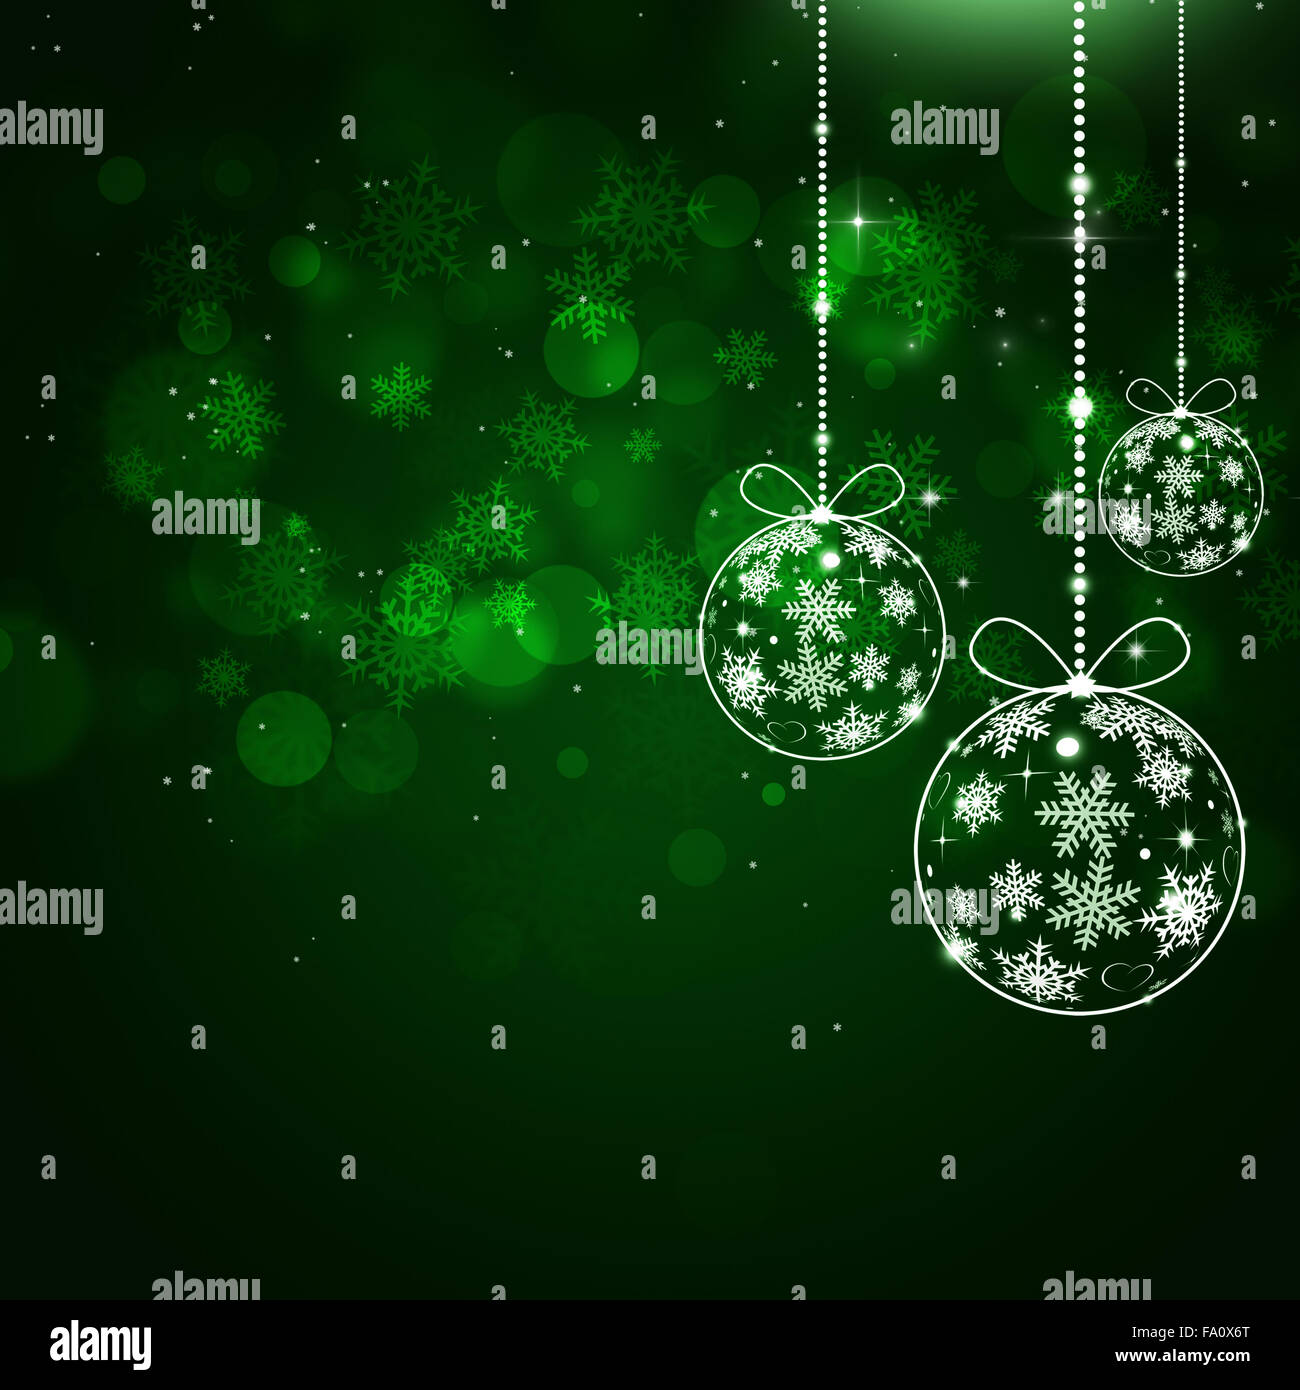 abstract holiday decoration green background with xmas balls and snowflakes Stock Photo